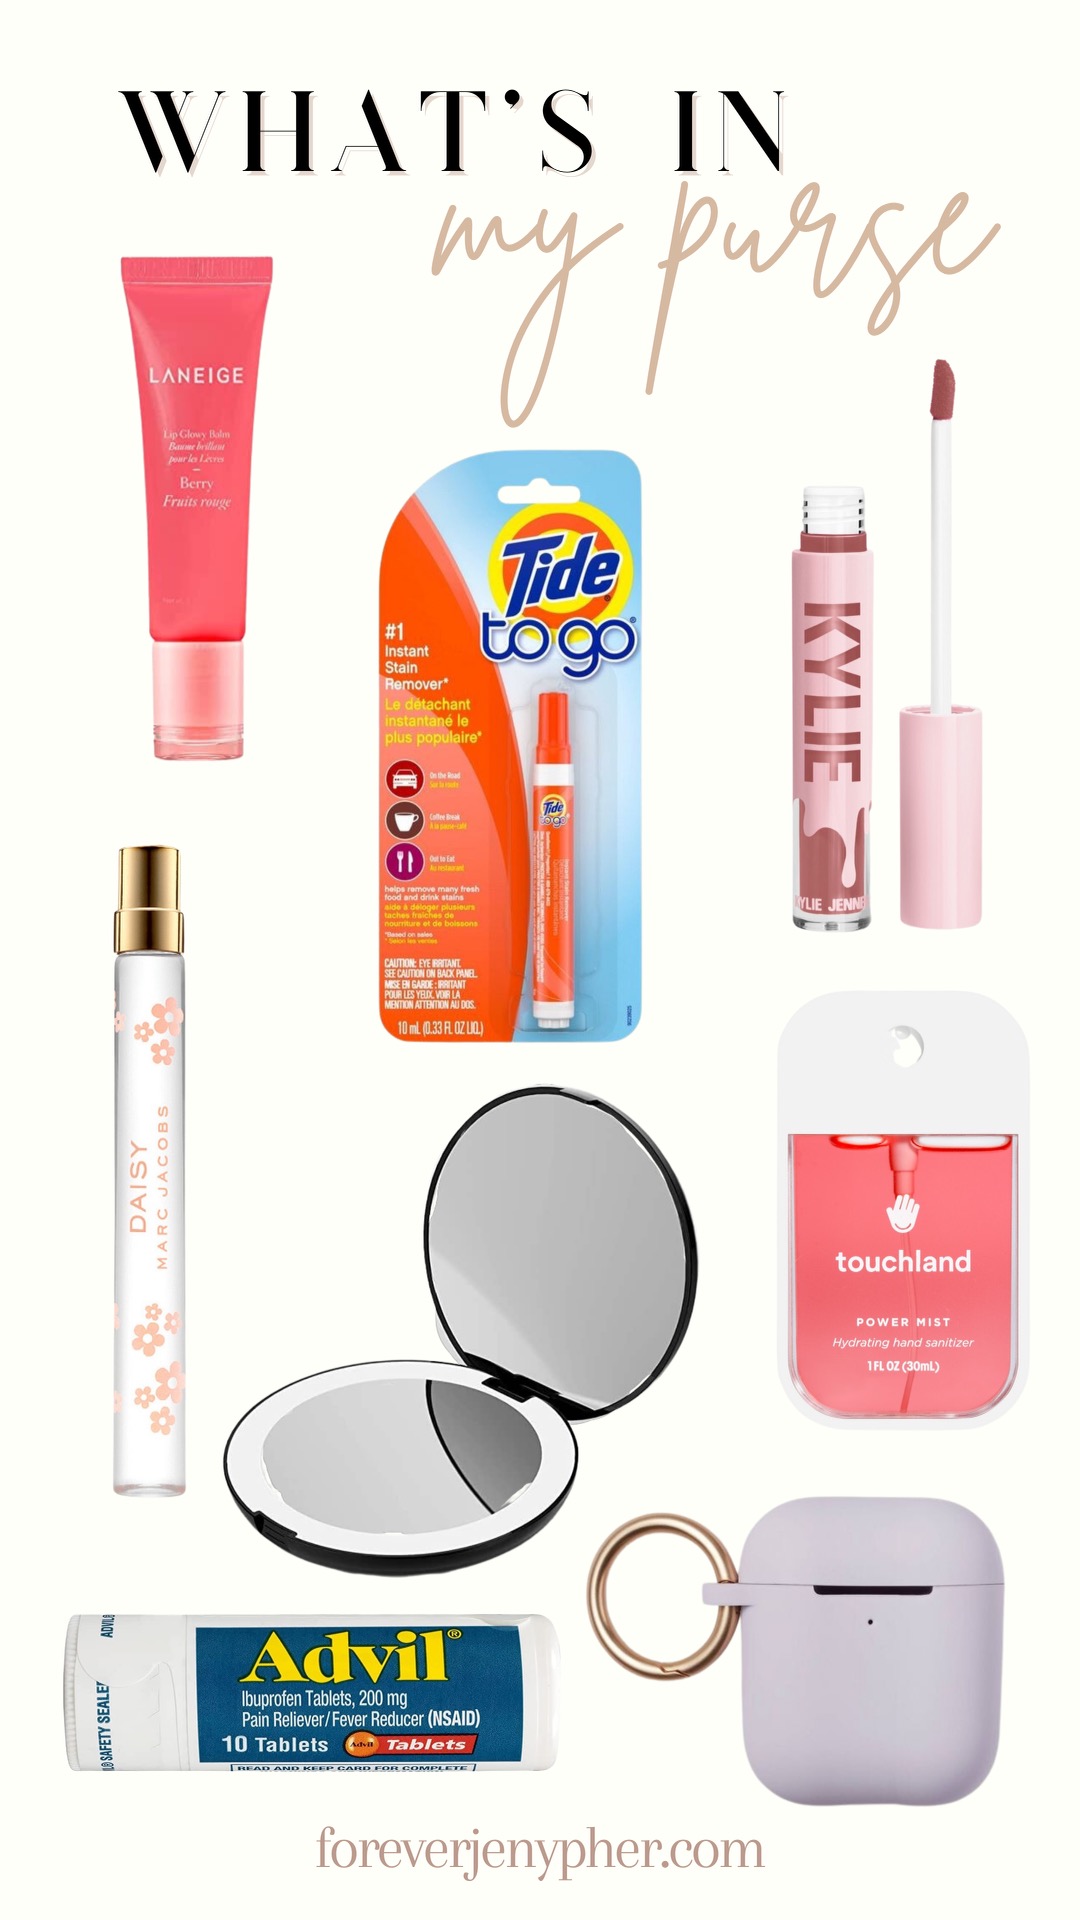 Top 10 Essentials You Should Keep in Your Purse